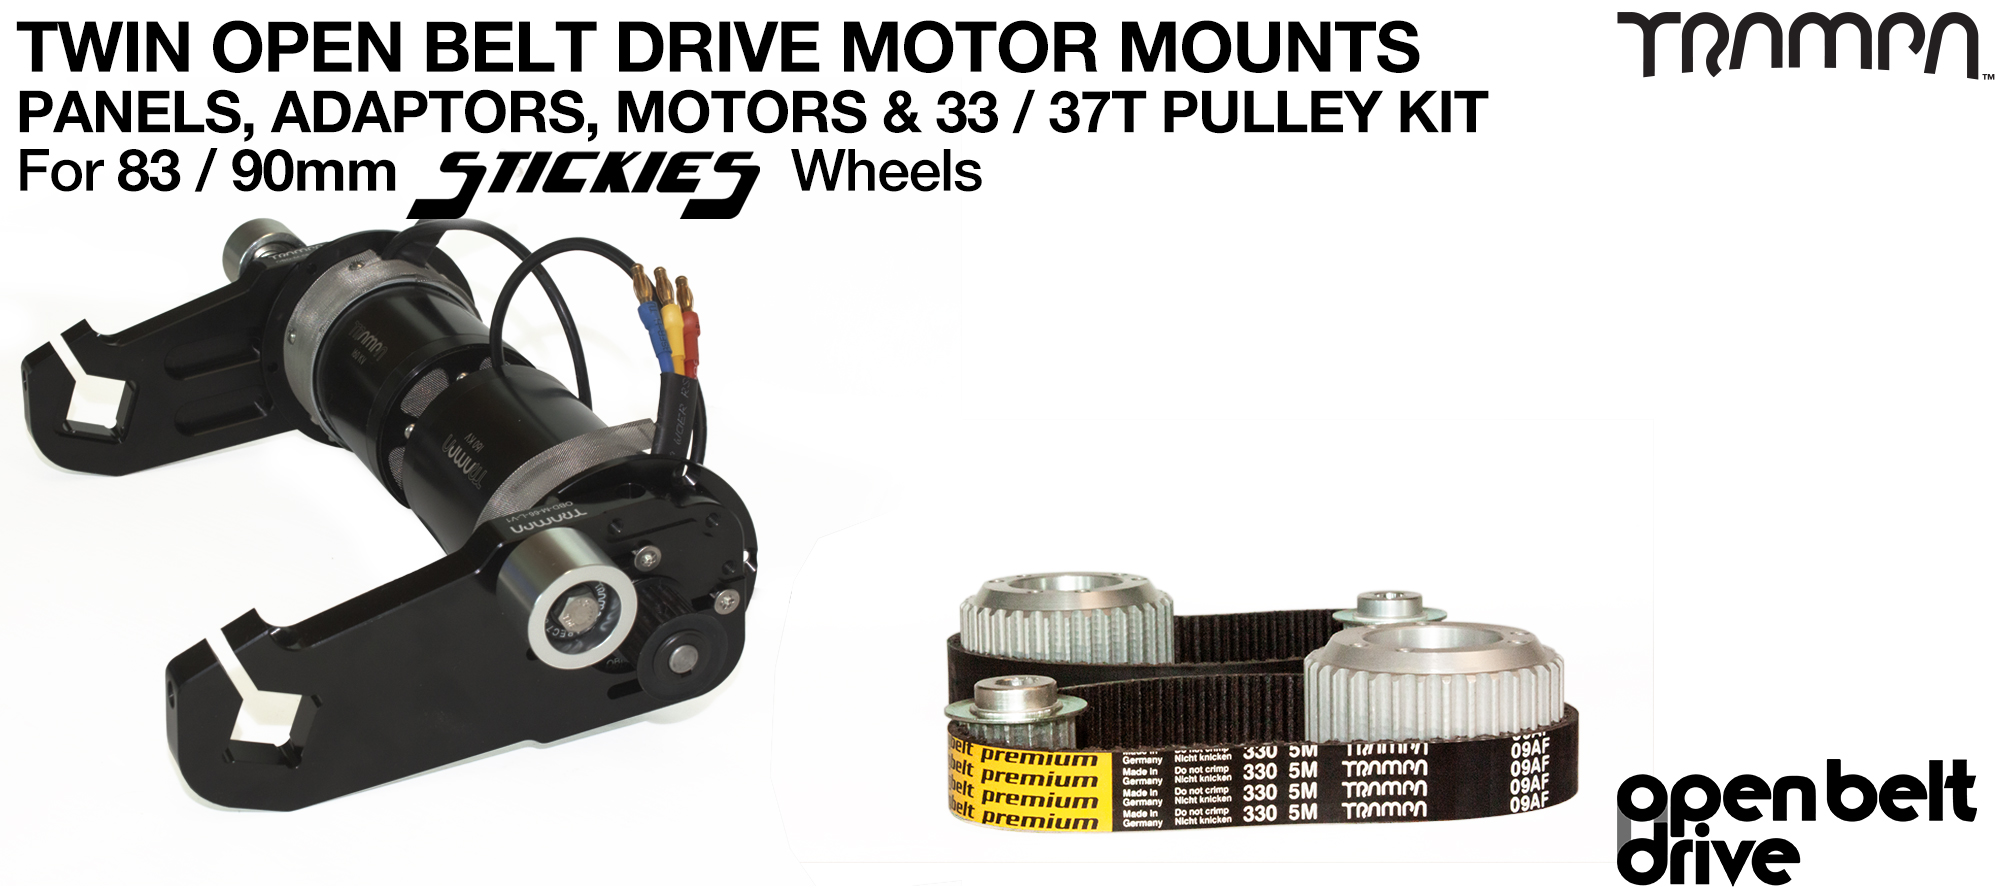 66T OBD Motor Mount with 33 / 37T Pulley kit & custom Motor - TWIN